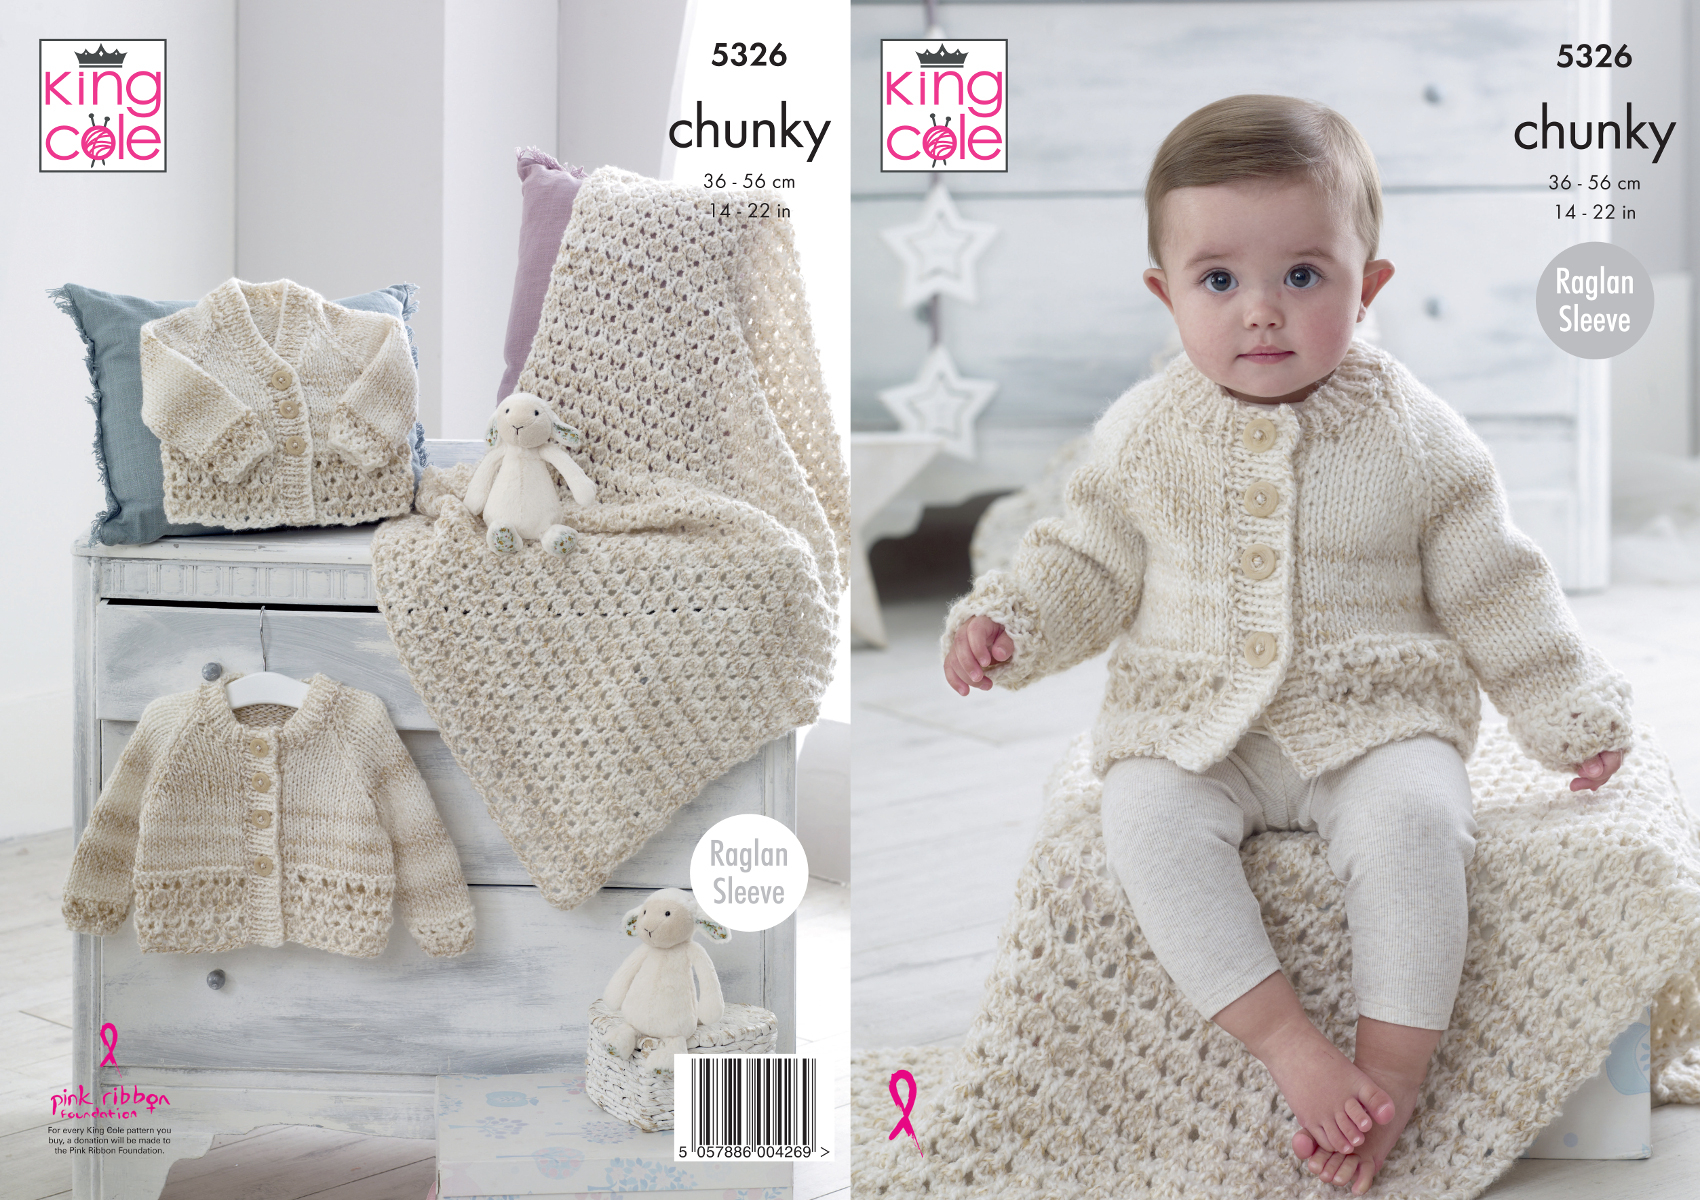 Baby Girl Blanket Knitting Patterns Details About Chunky Knitting Pattern King Cole Ba Round Or V Neck Cardigan Blanket 5326